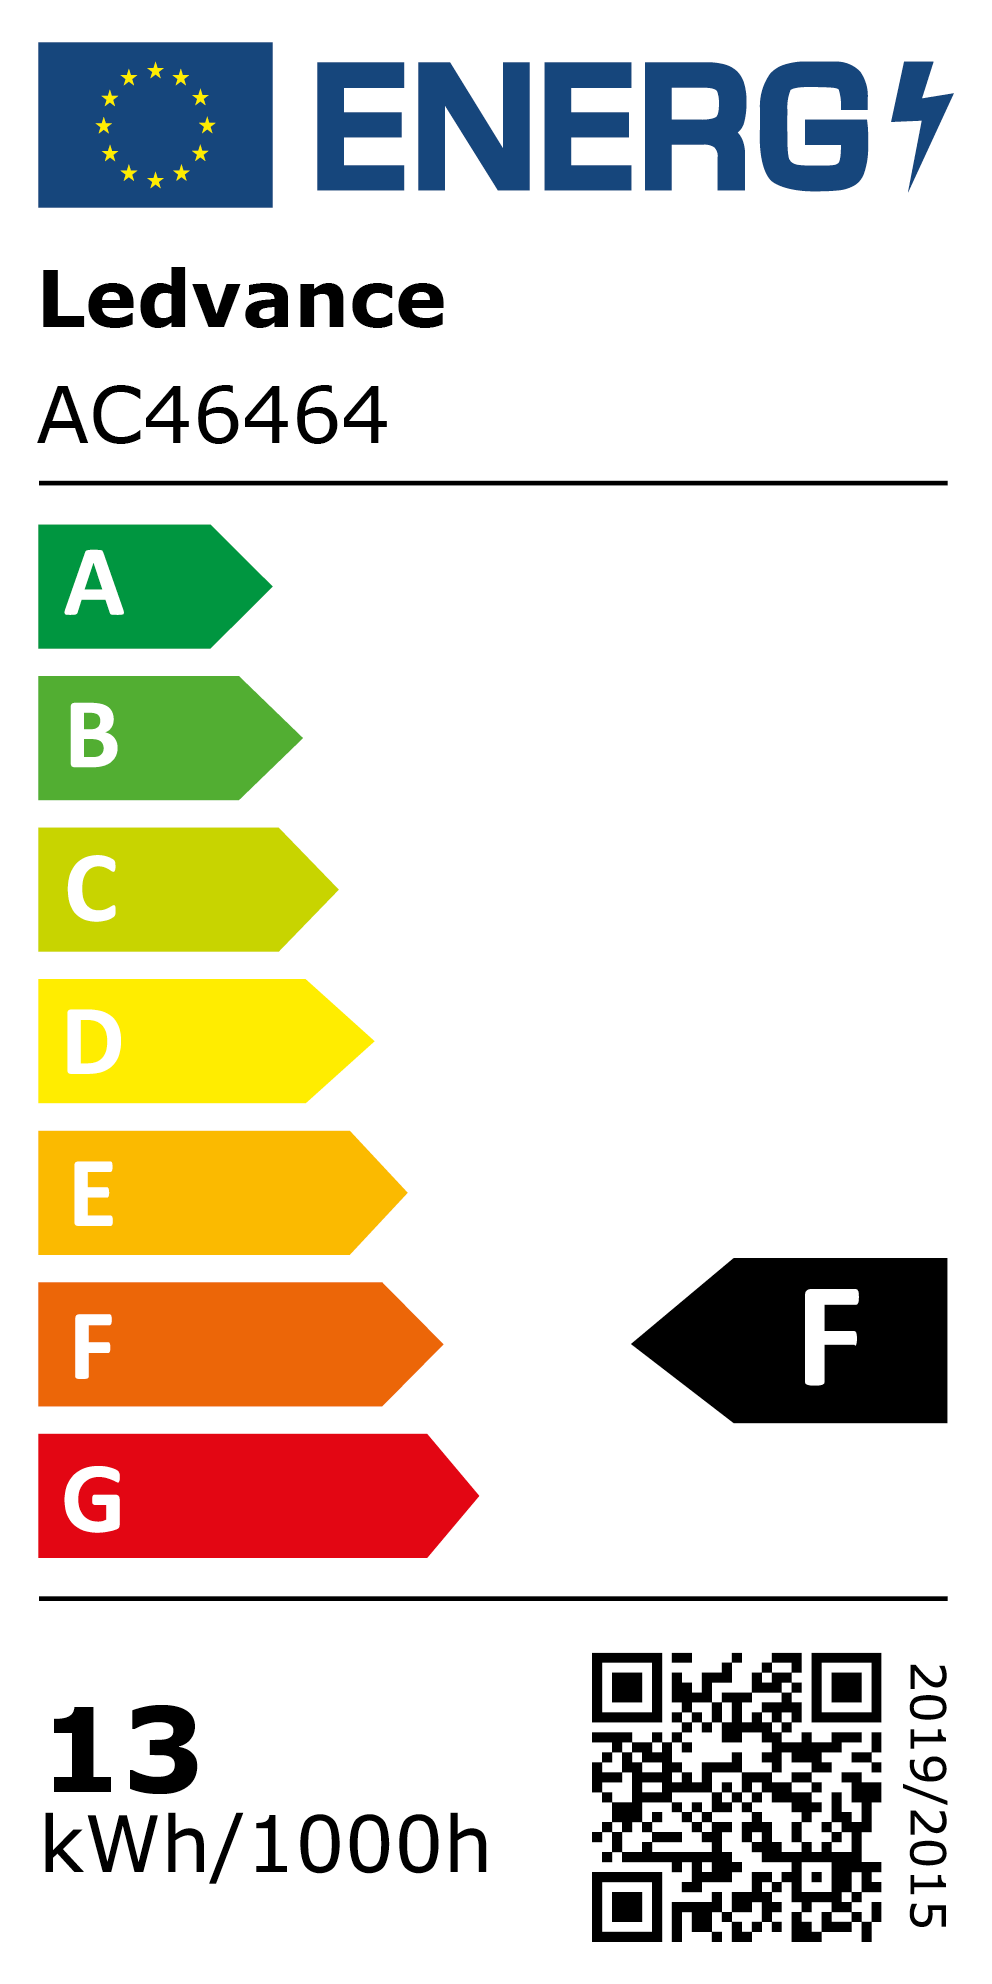 New 2021 Energy Rating Label: MPN AC46464